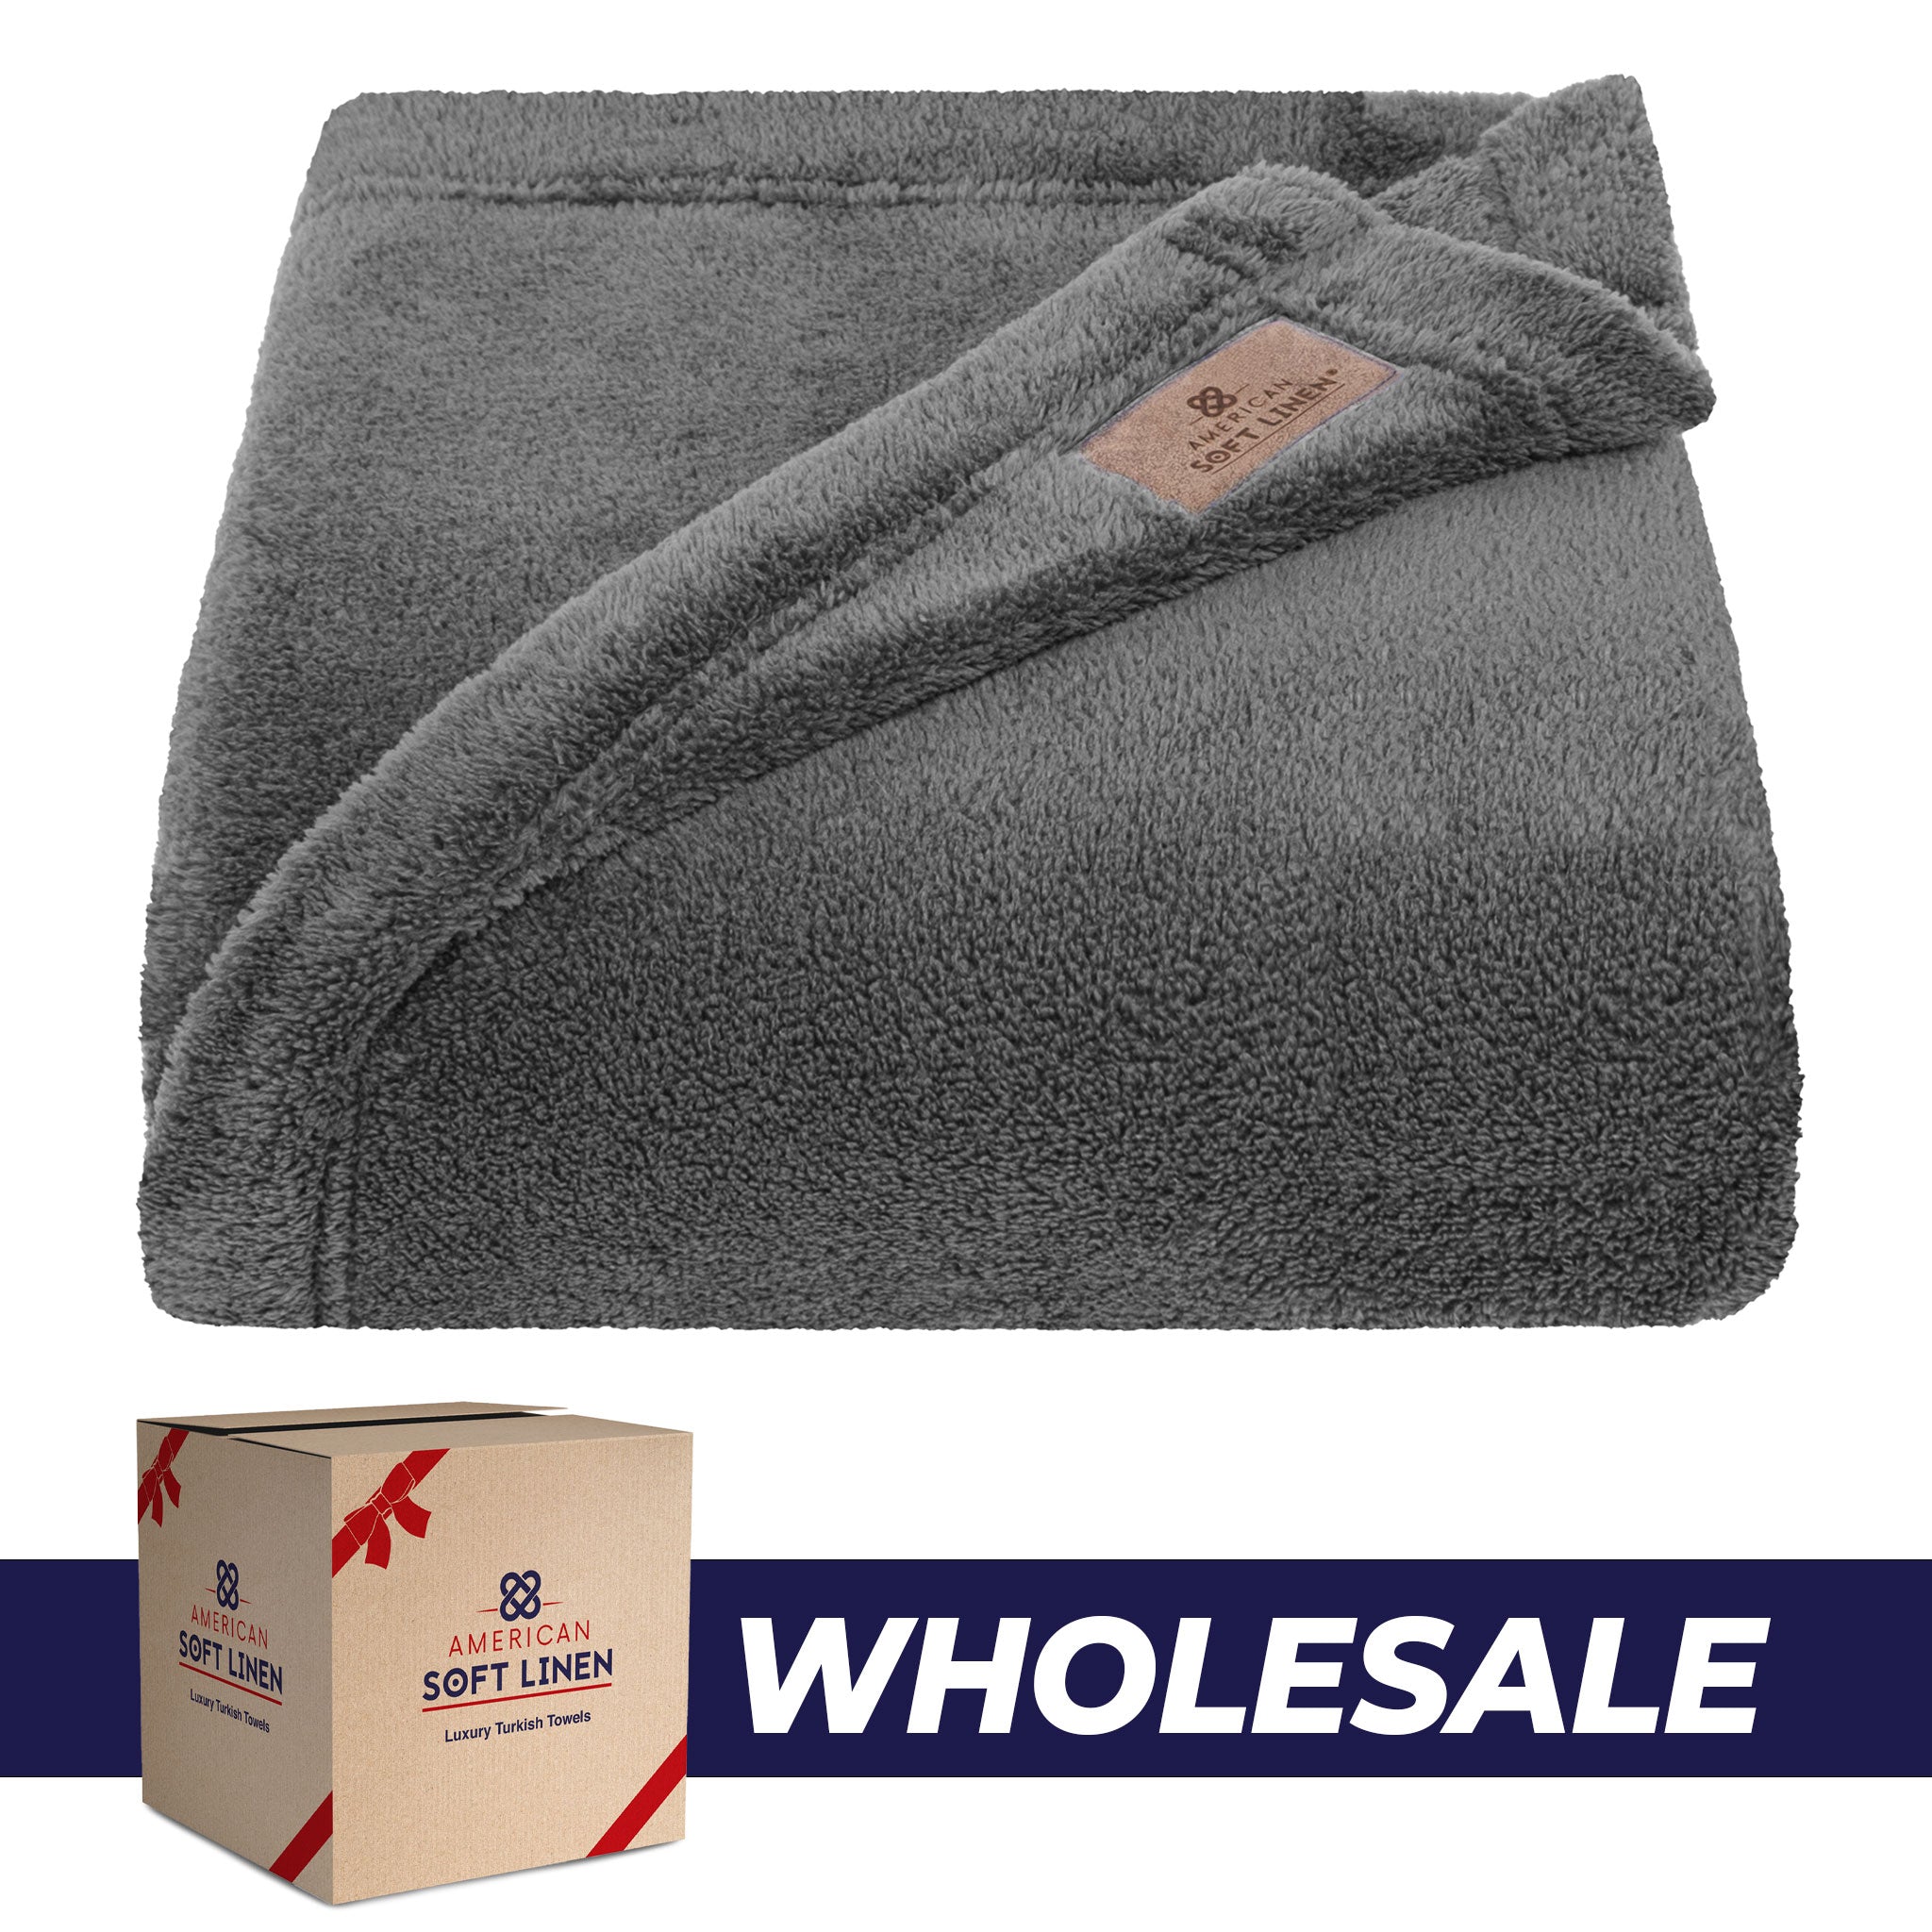 American Soft Linen - Bedding Fleece Blanket - Wholesale - 24 Set Case Pack - Throw Size 50x60 inches - Gray - 0